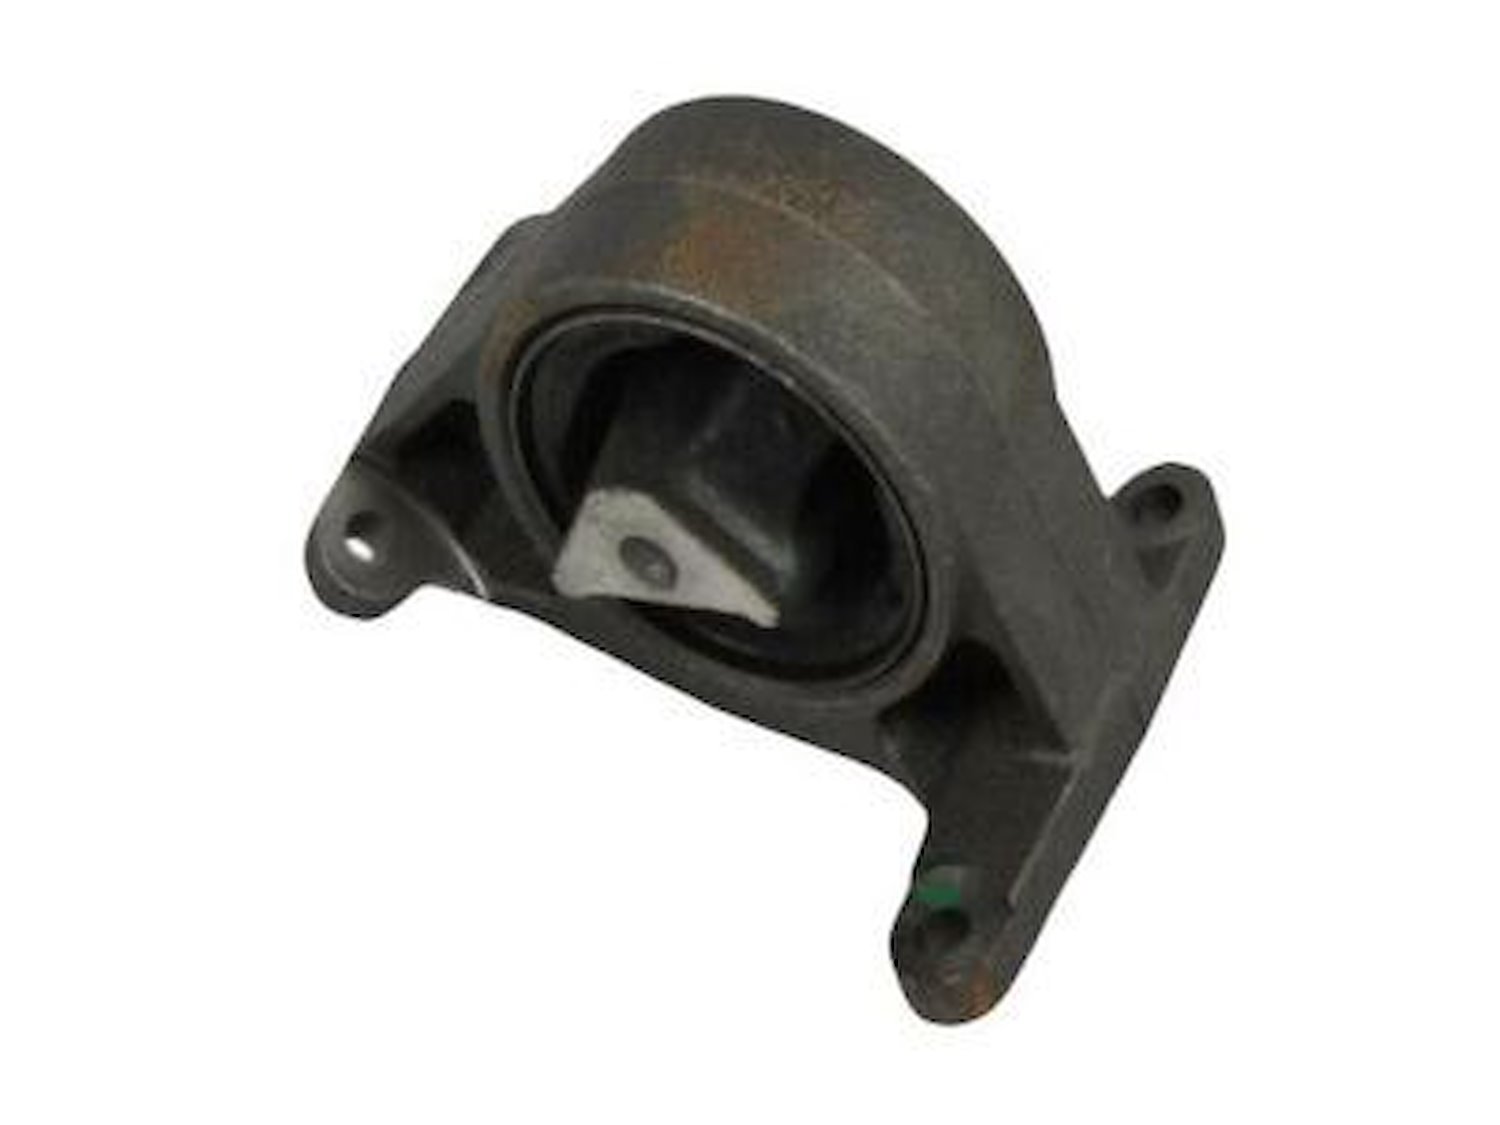 Engine Mount Insulator for 2001-2004 Jeep Grand Cherokee 4.7L [Left/Driver Side]